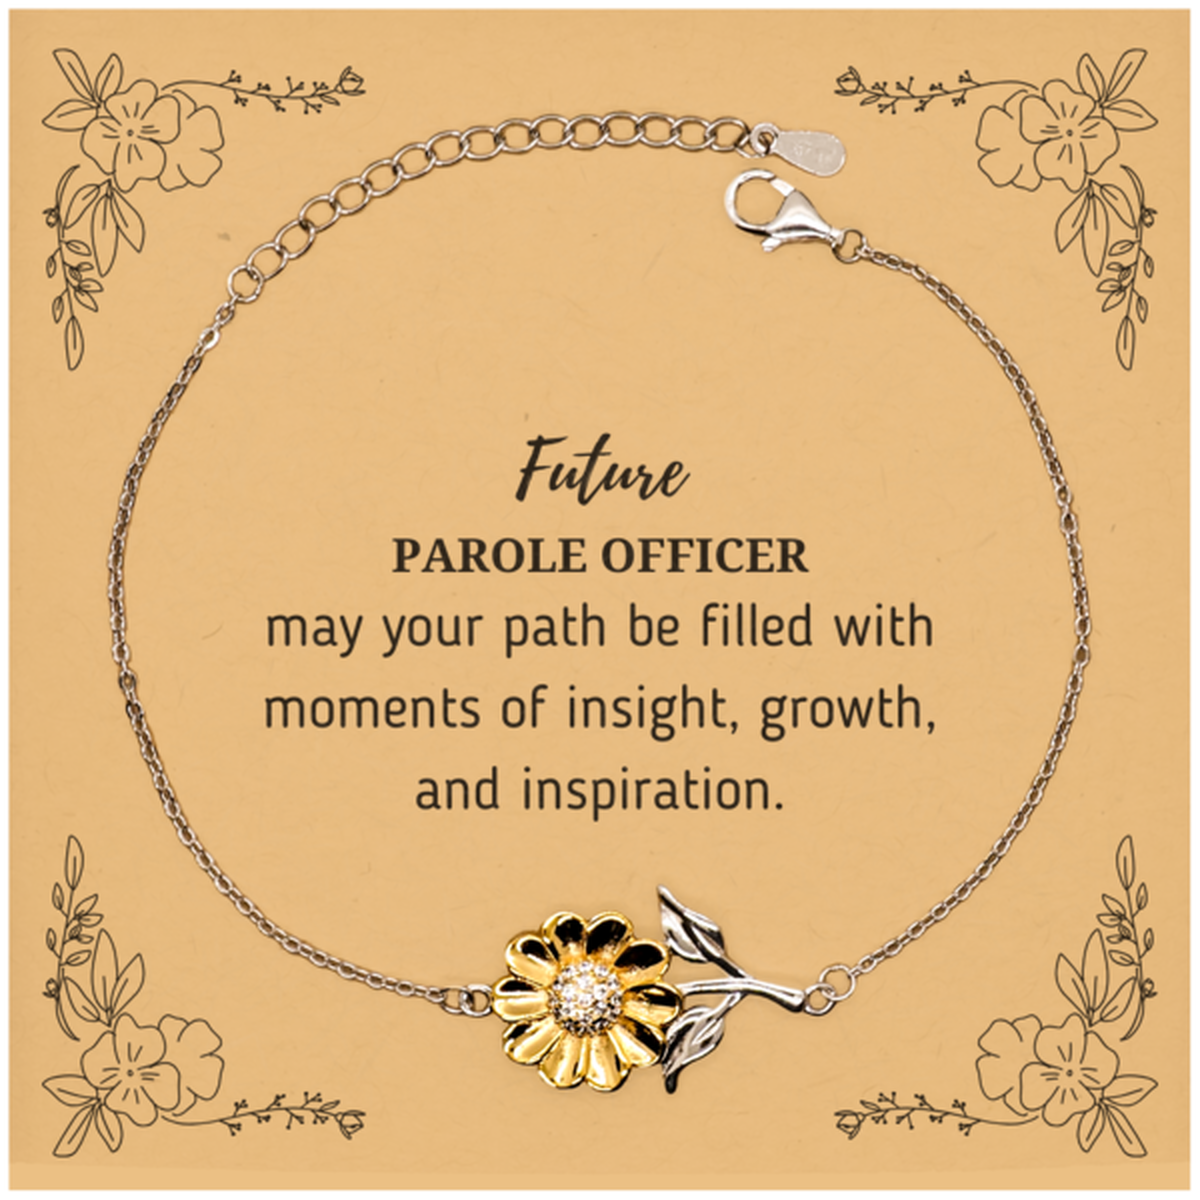 Future Parole Officer Gifts, May your path be filled with moments of insight, Graduation Gifts for New Parole Officer, Christmas Unique Sunflower Bracelet For Men, Women, Friends